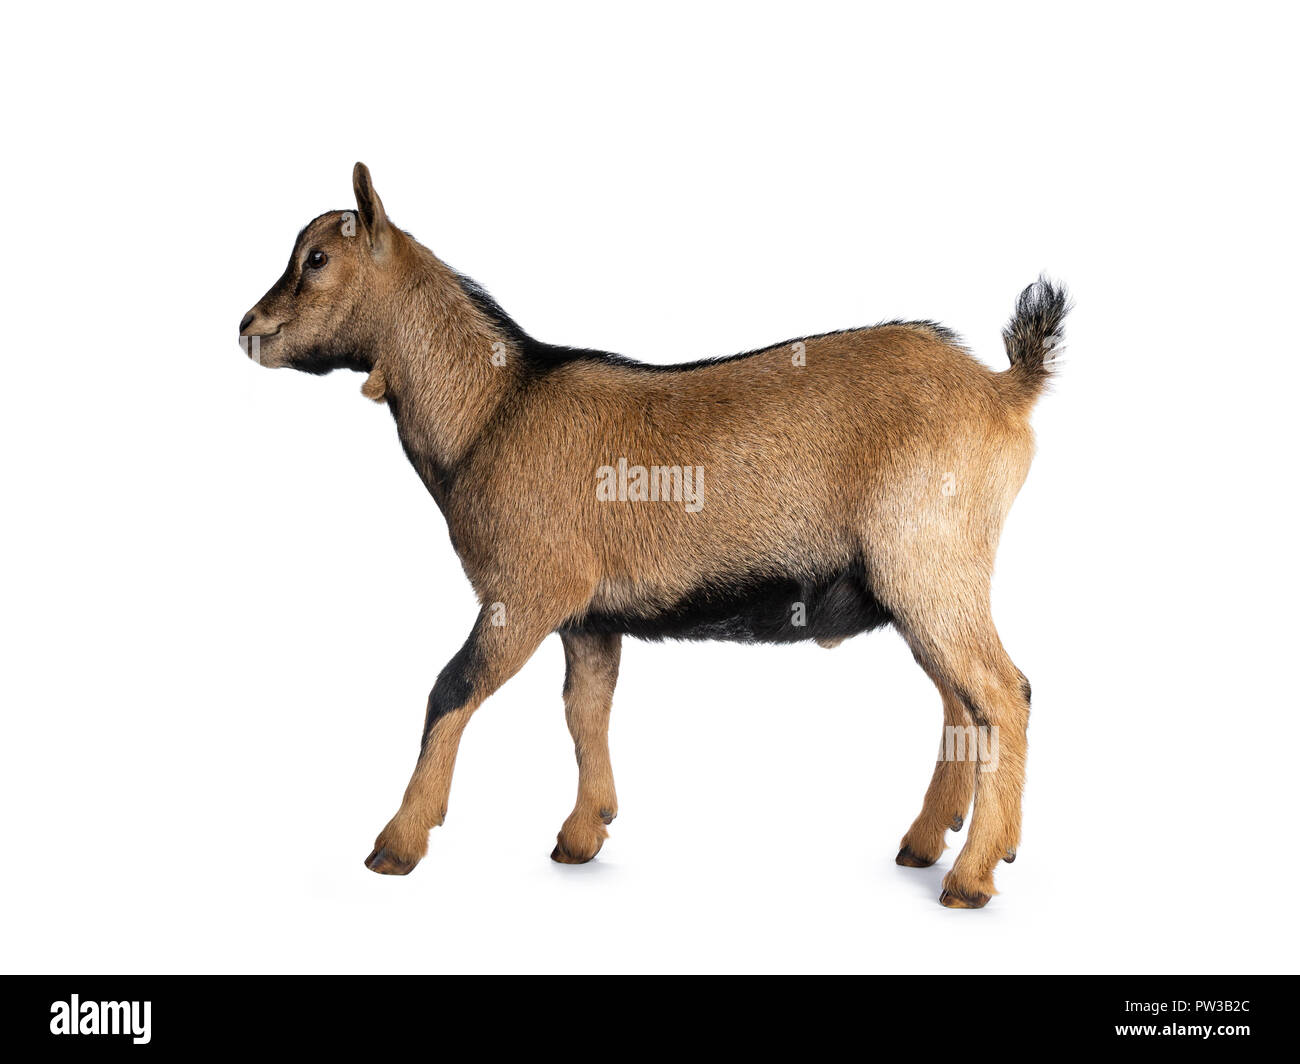 Brown agouti pygmy goat waling side ways lookingstraight ahead, isolated on white background Stock Photo